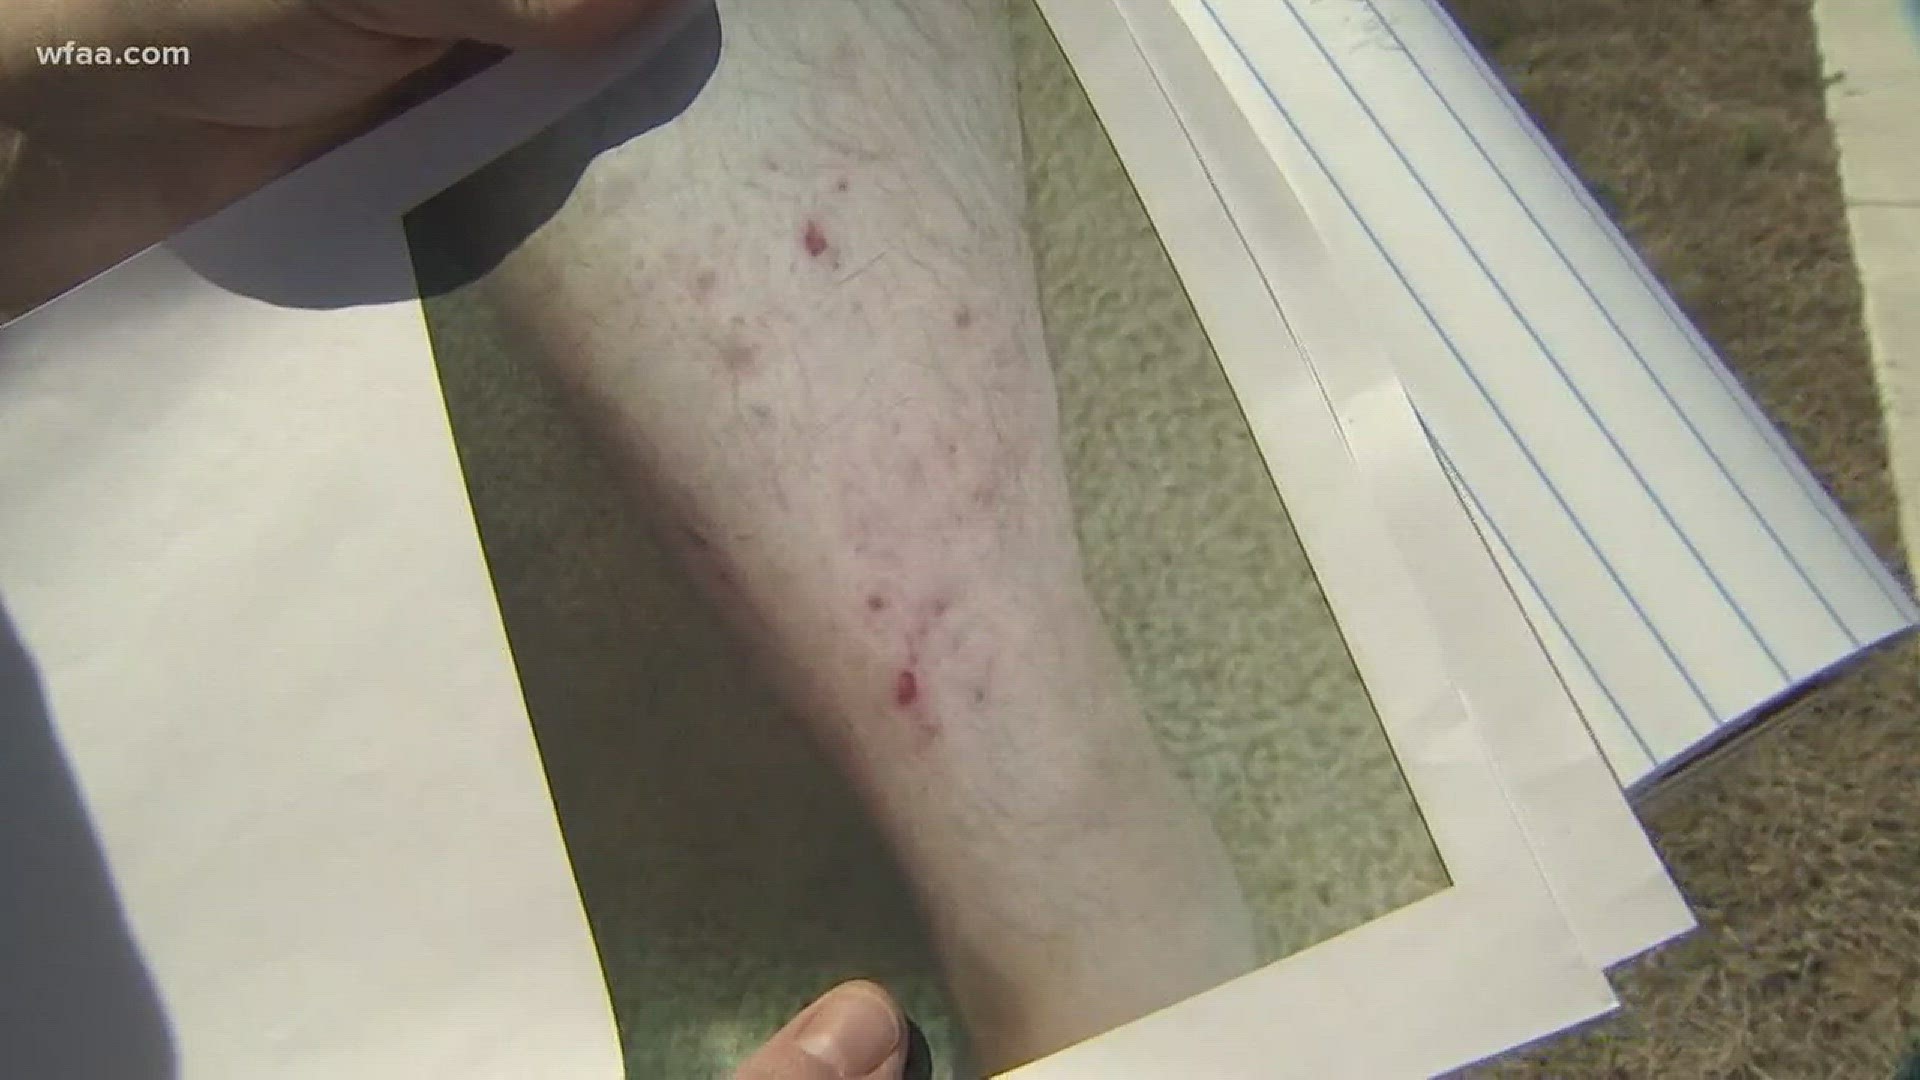 Ponder residents claim water is causing rashes